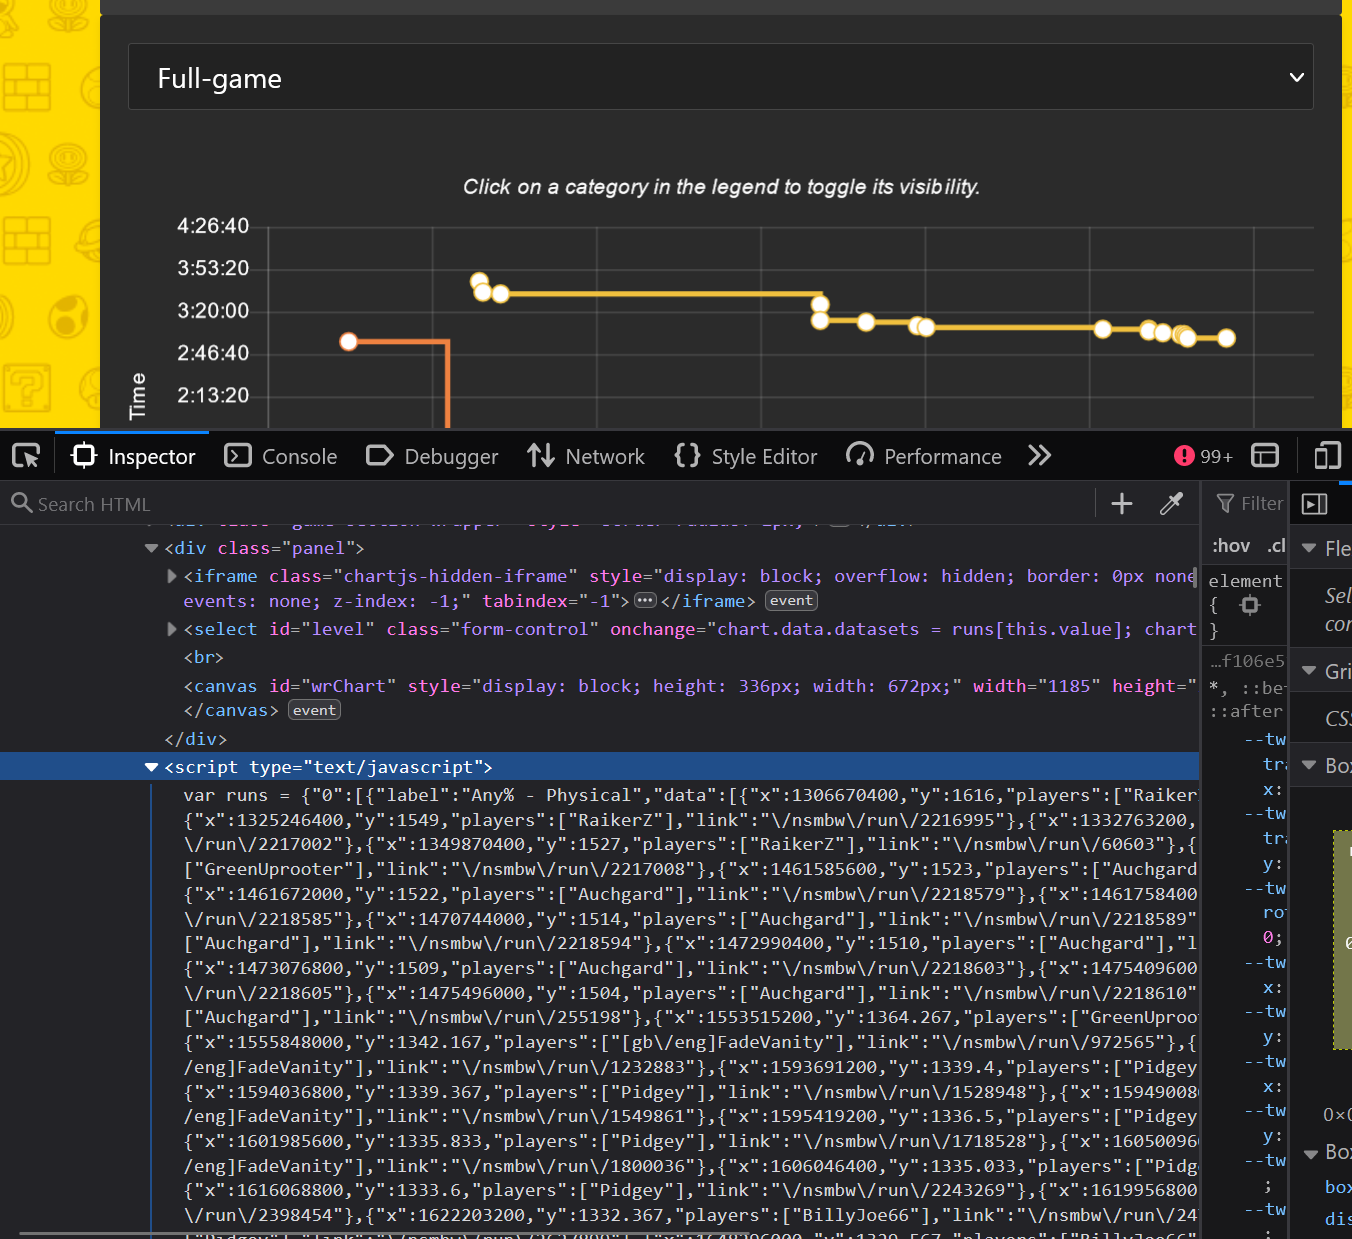 A screenshot of the Firefox inspector showing the speedrun data in a Javascript script tag.